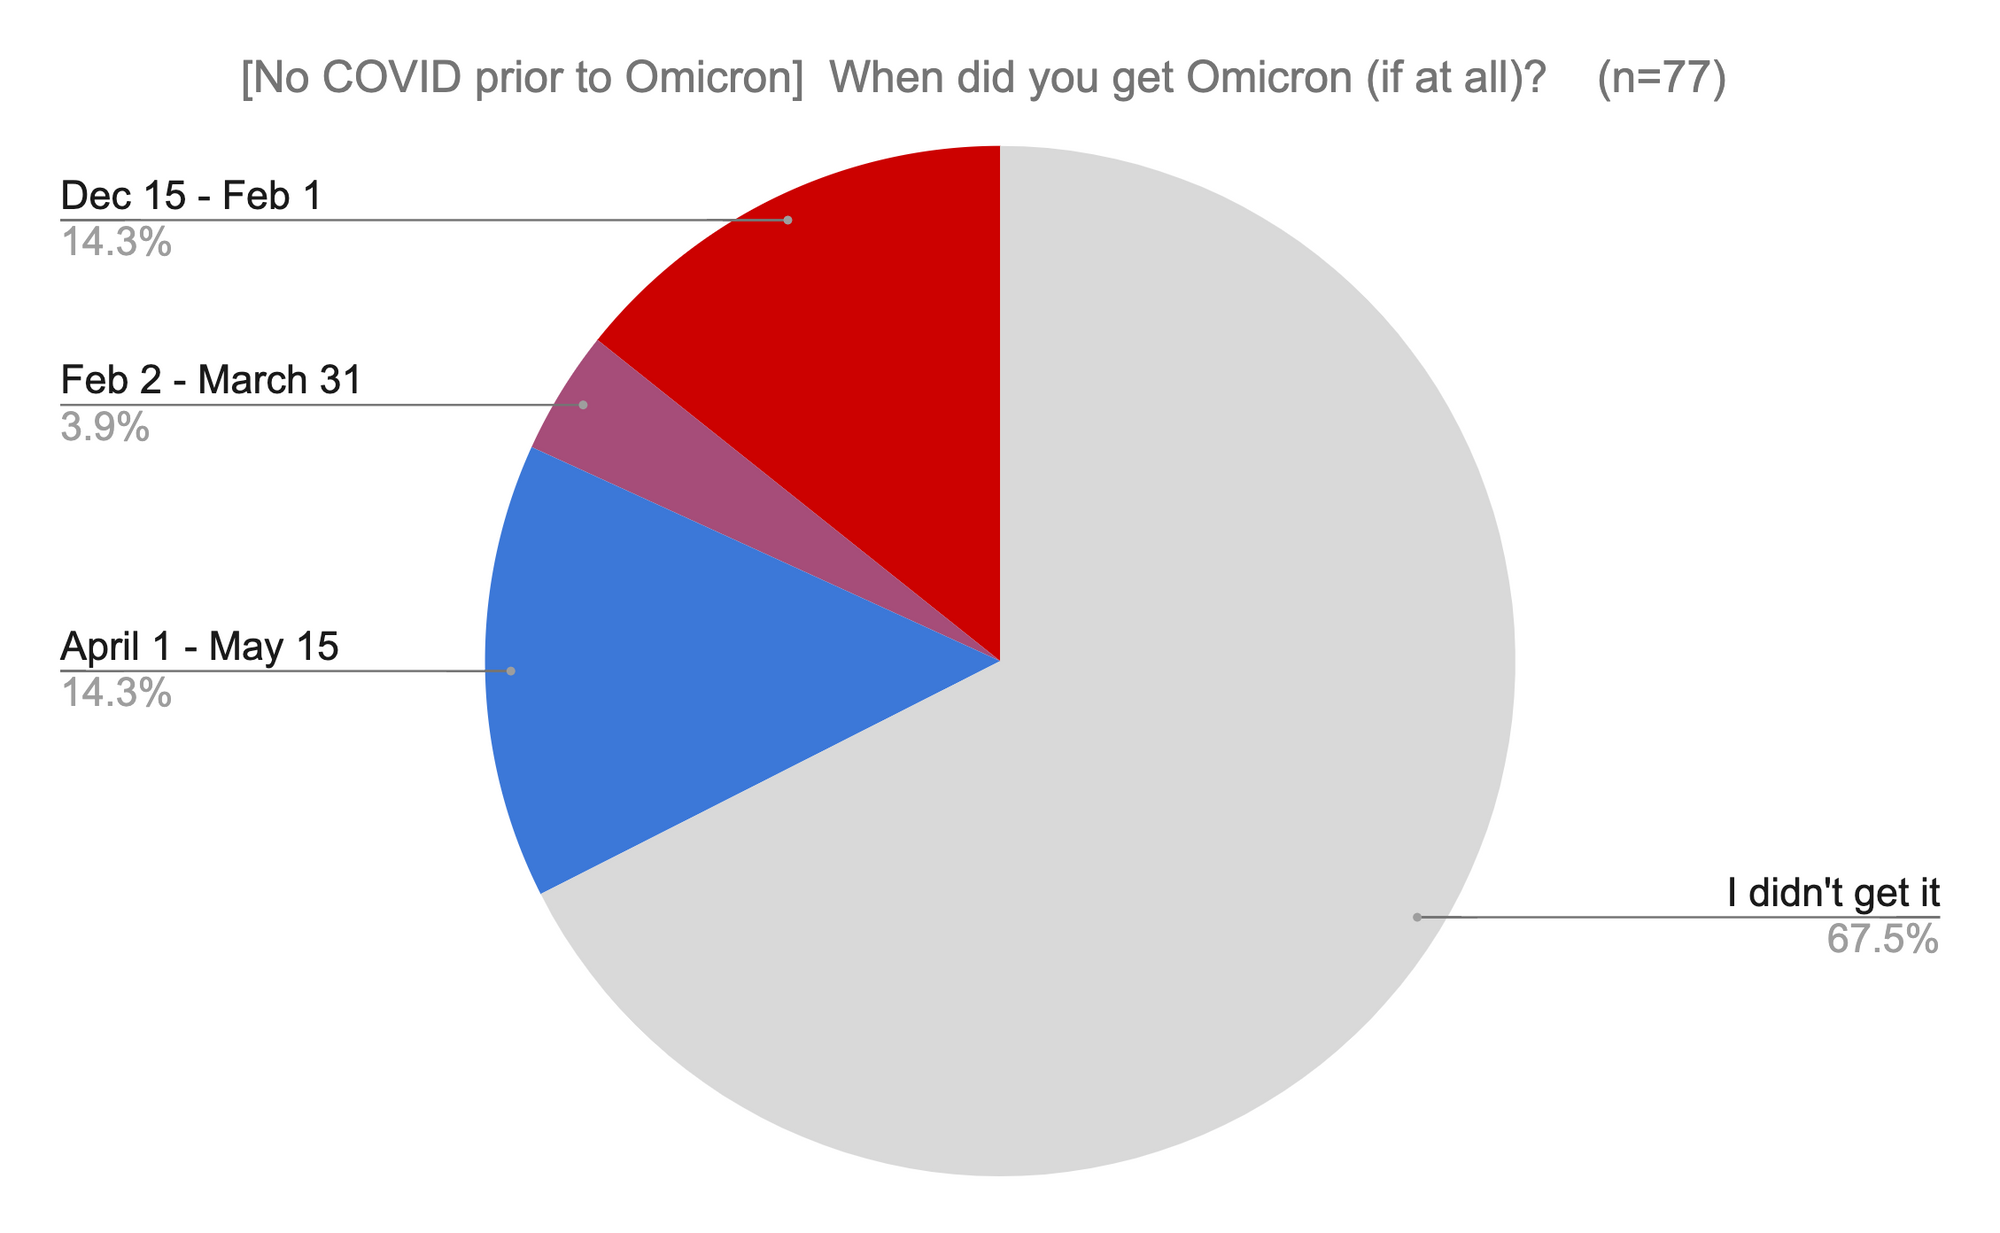 Results of Omicron Experience Survey